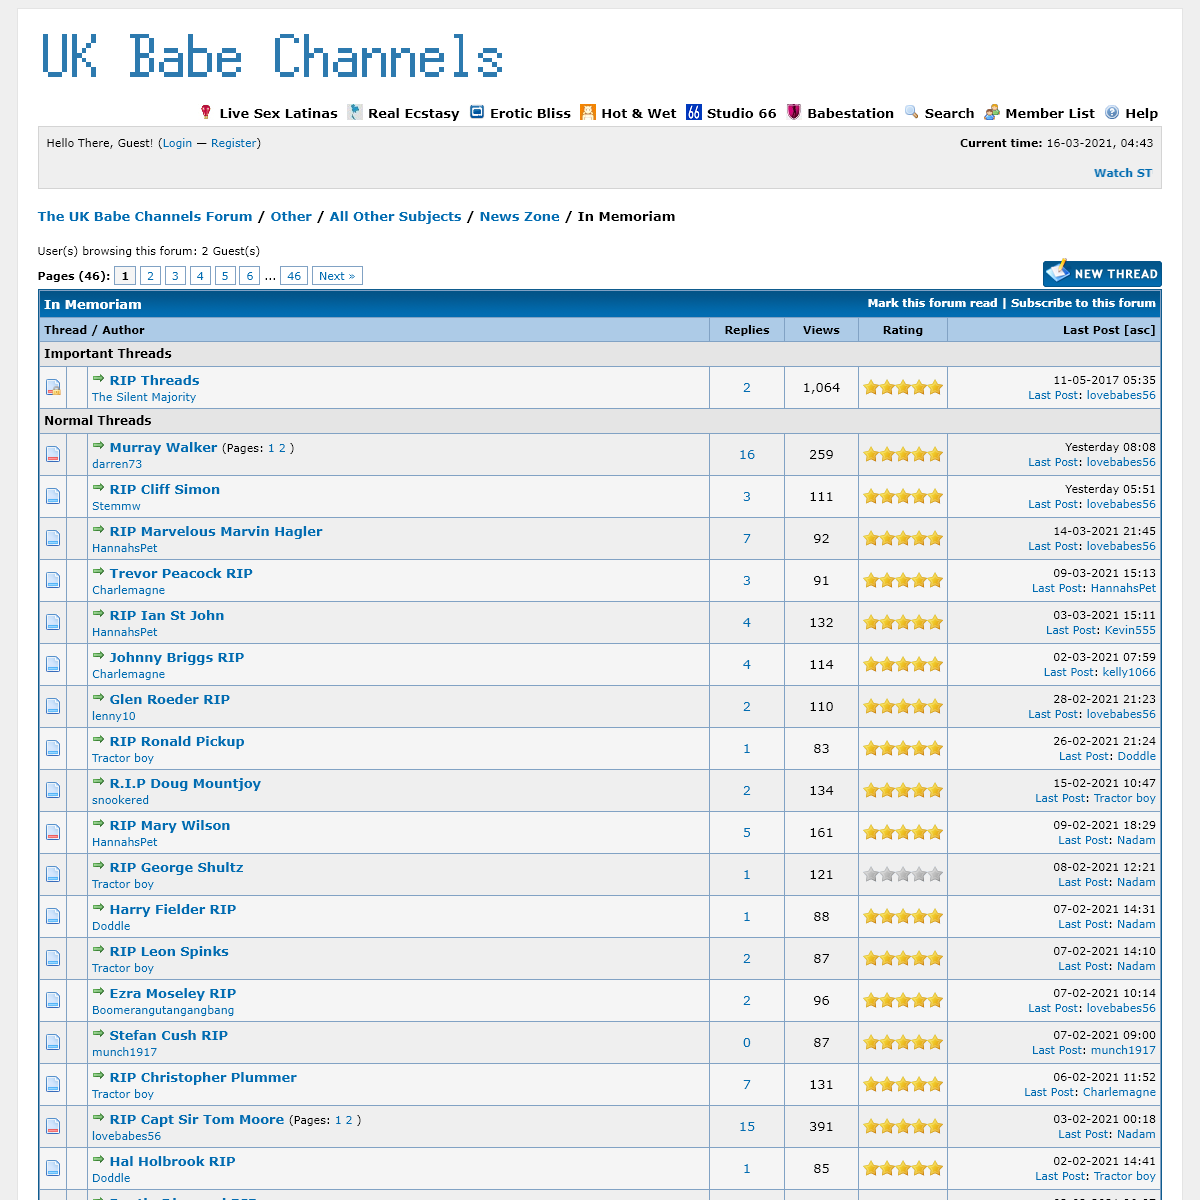 The UK Babe Channels Forum - In Memoriam